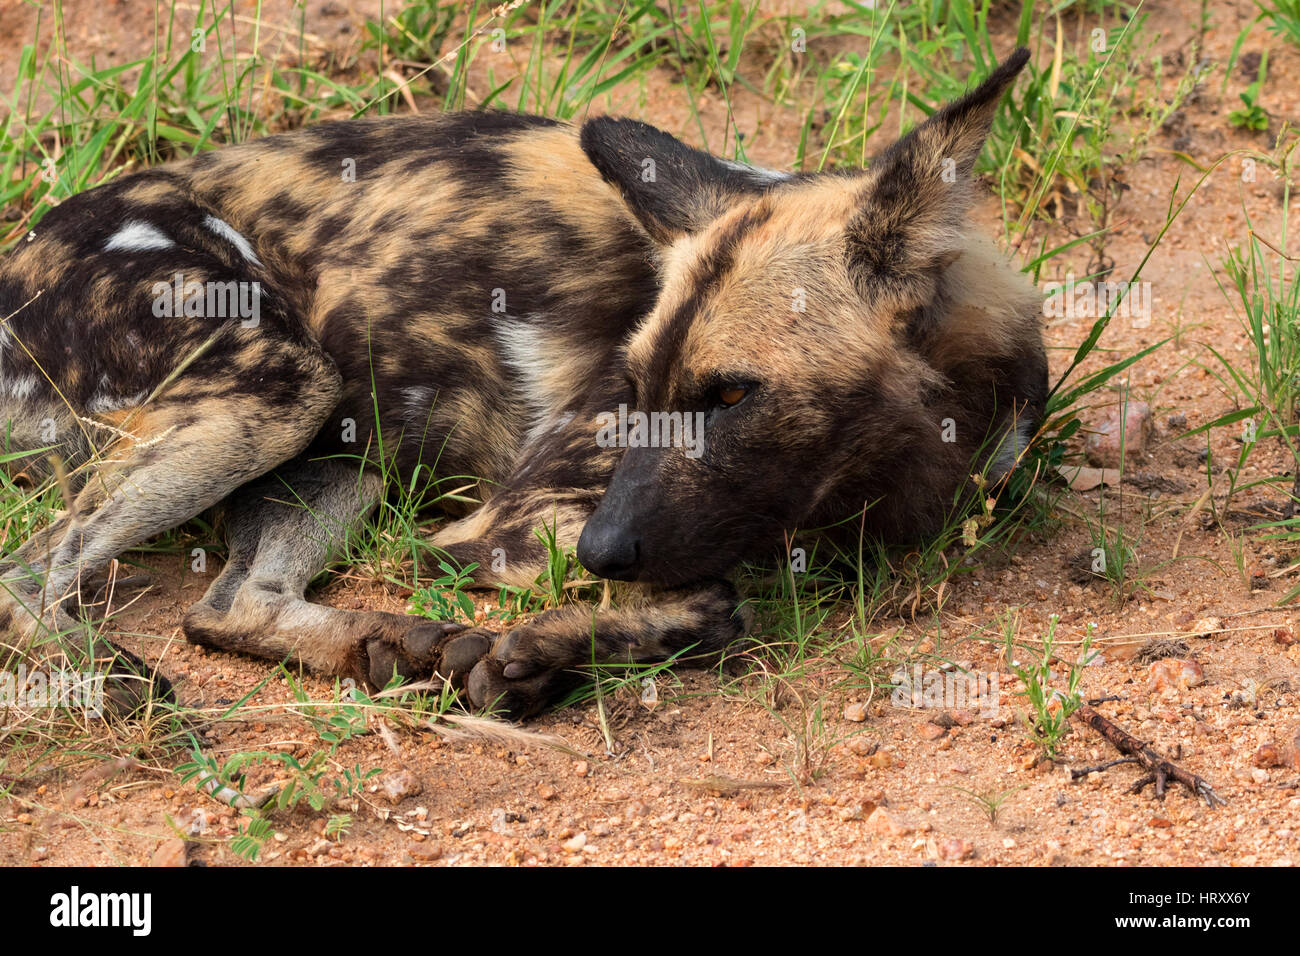 African wild dog or african painted dog, Kruger National Park, South Africa Stock Photo